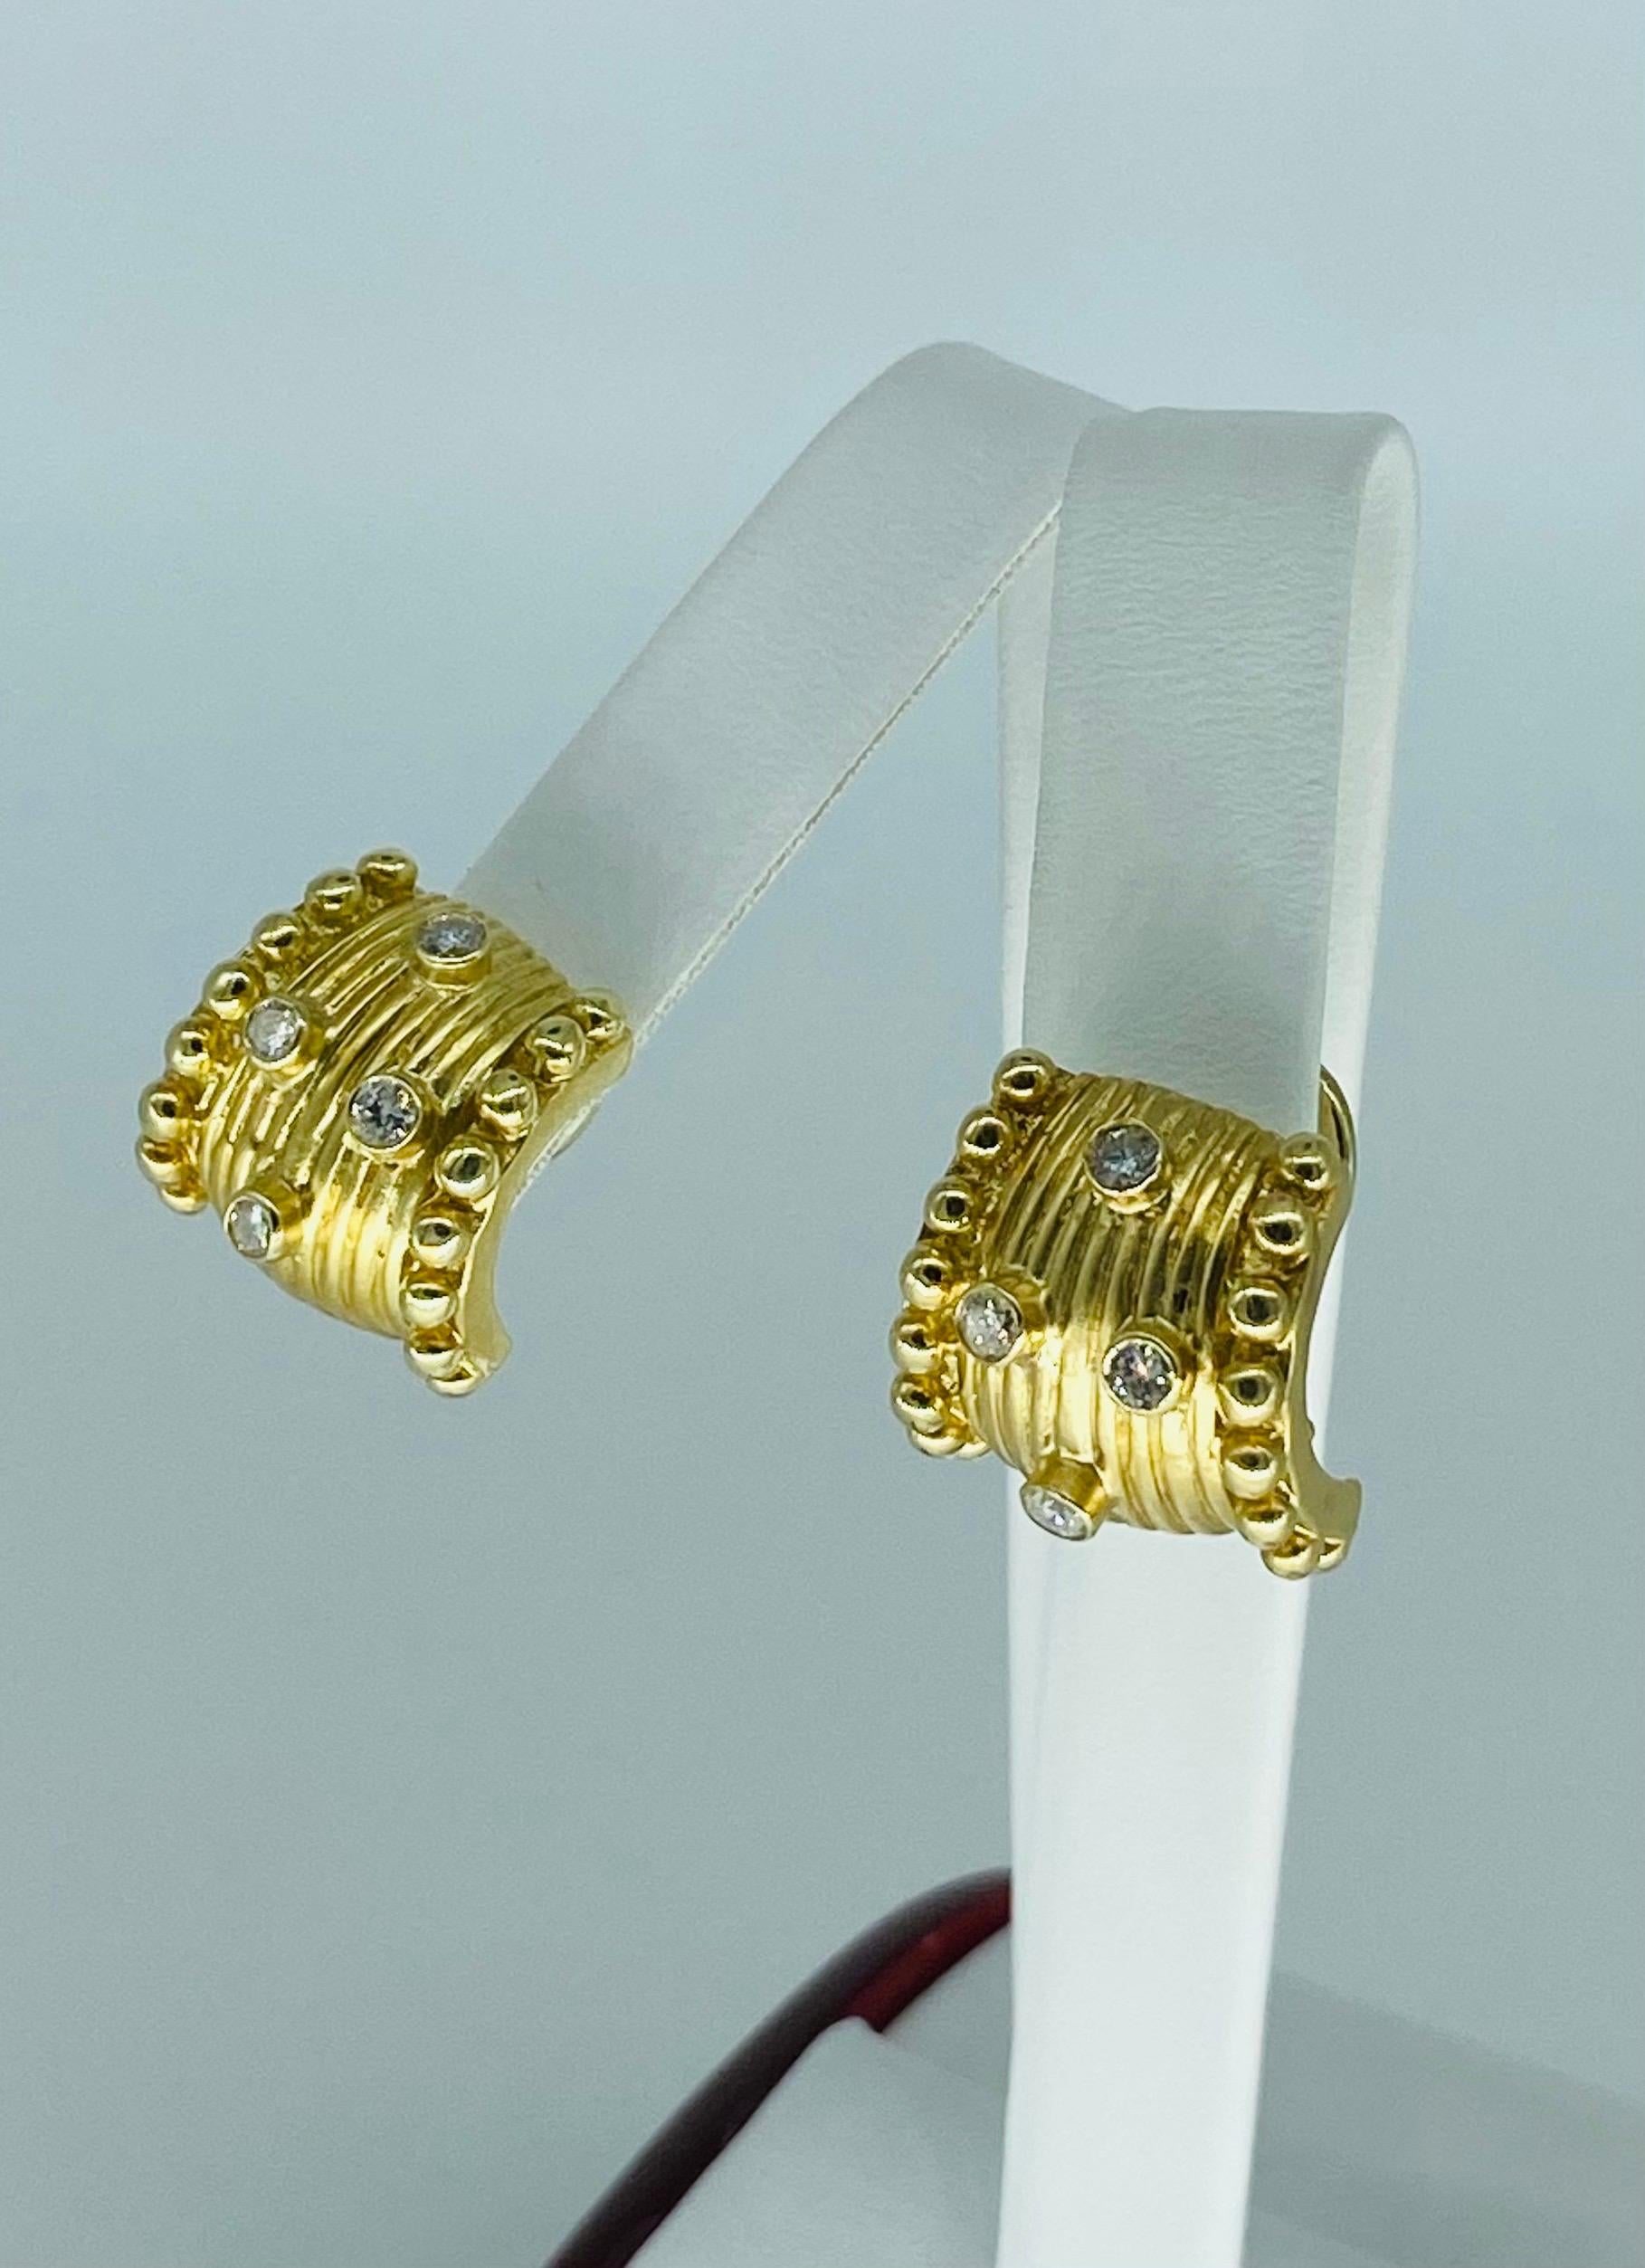 Vintage 0.80 Carat Large Diamonds Clip Earrings 14k Yellow Gold. The earrings feature a total of 8 diamonds approx weight in total of 0.80 carat. White diamonds very high quality with bezel cup settings hand carved gold design earrings. The earrings